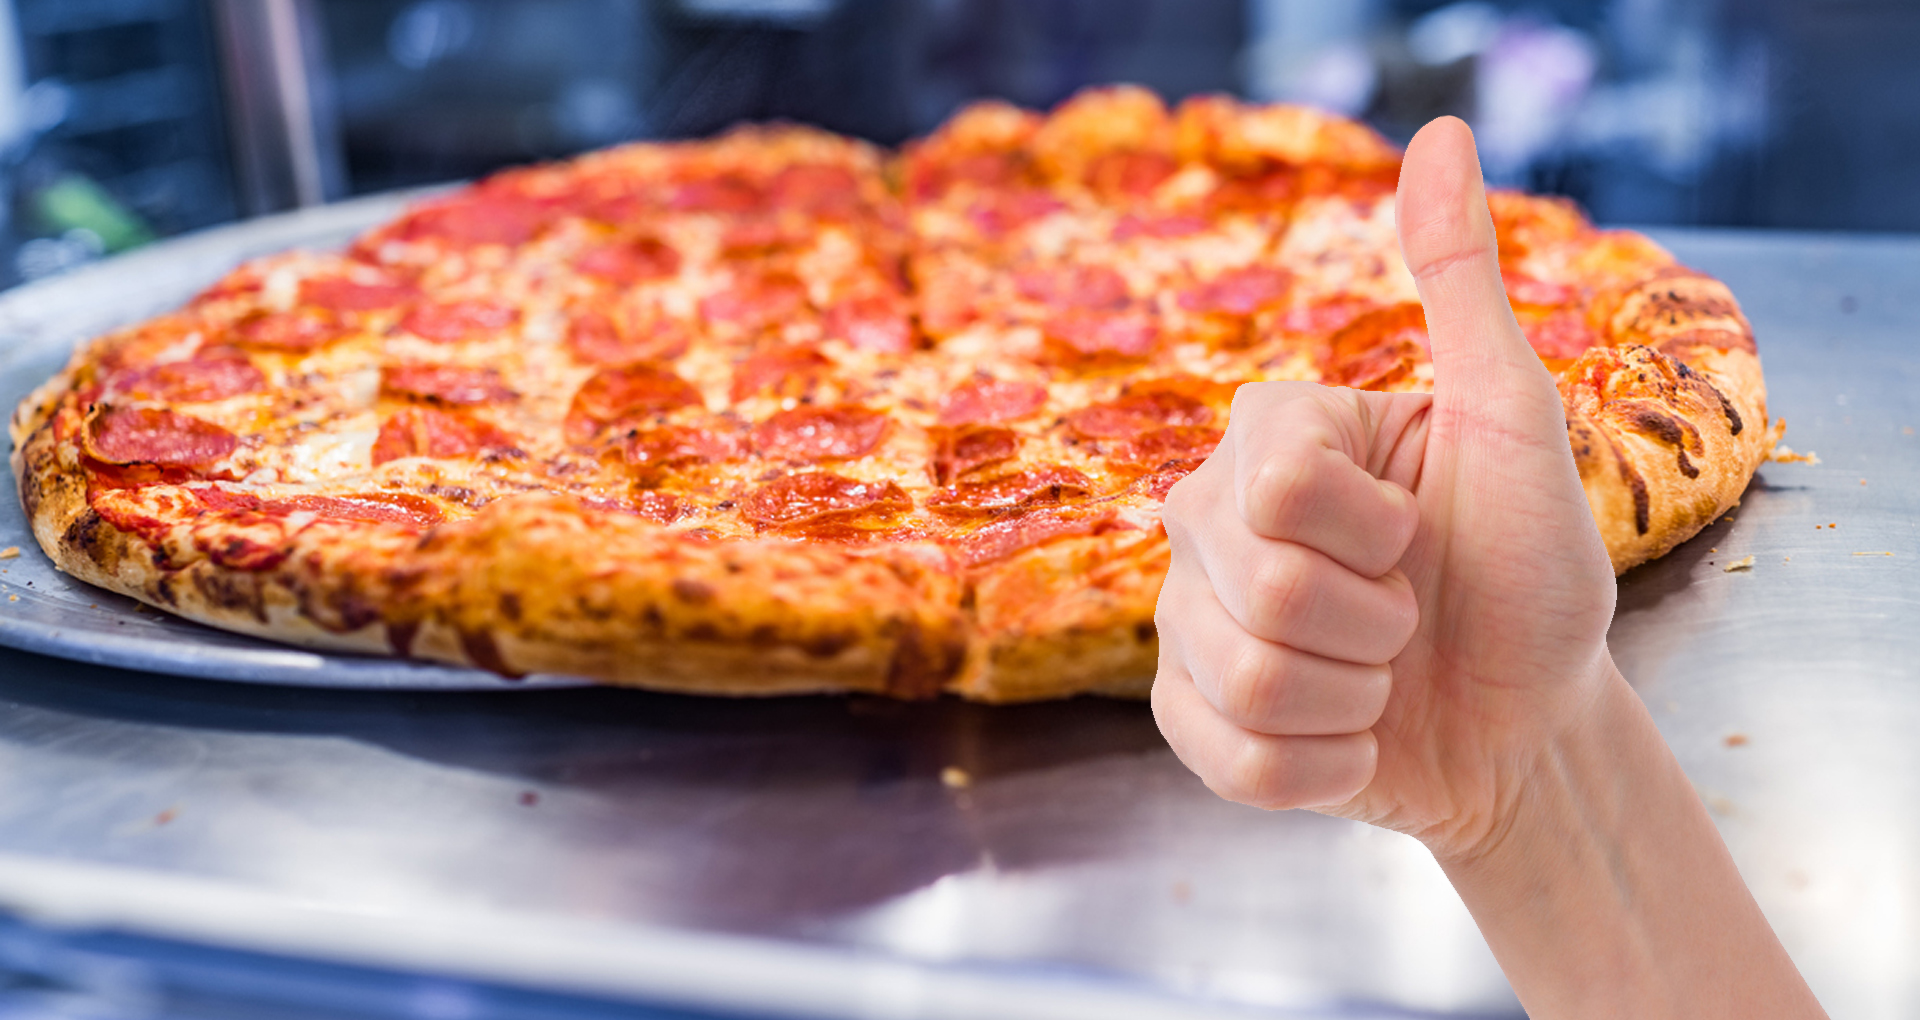 A person giving a hot pizza a thumbs up